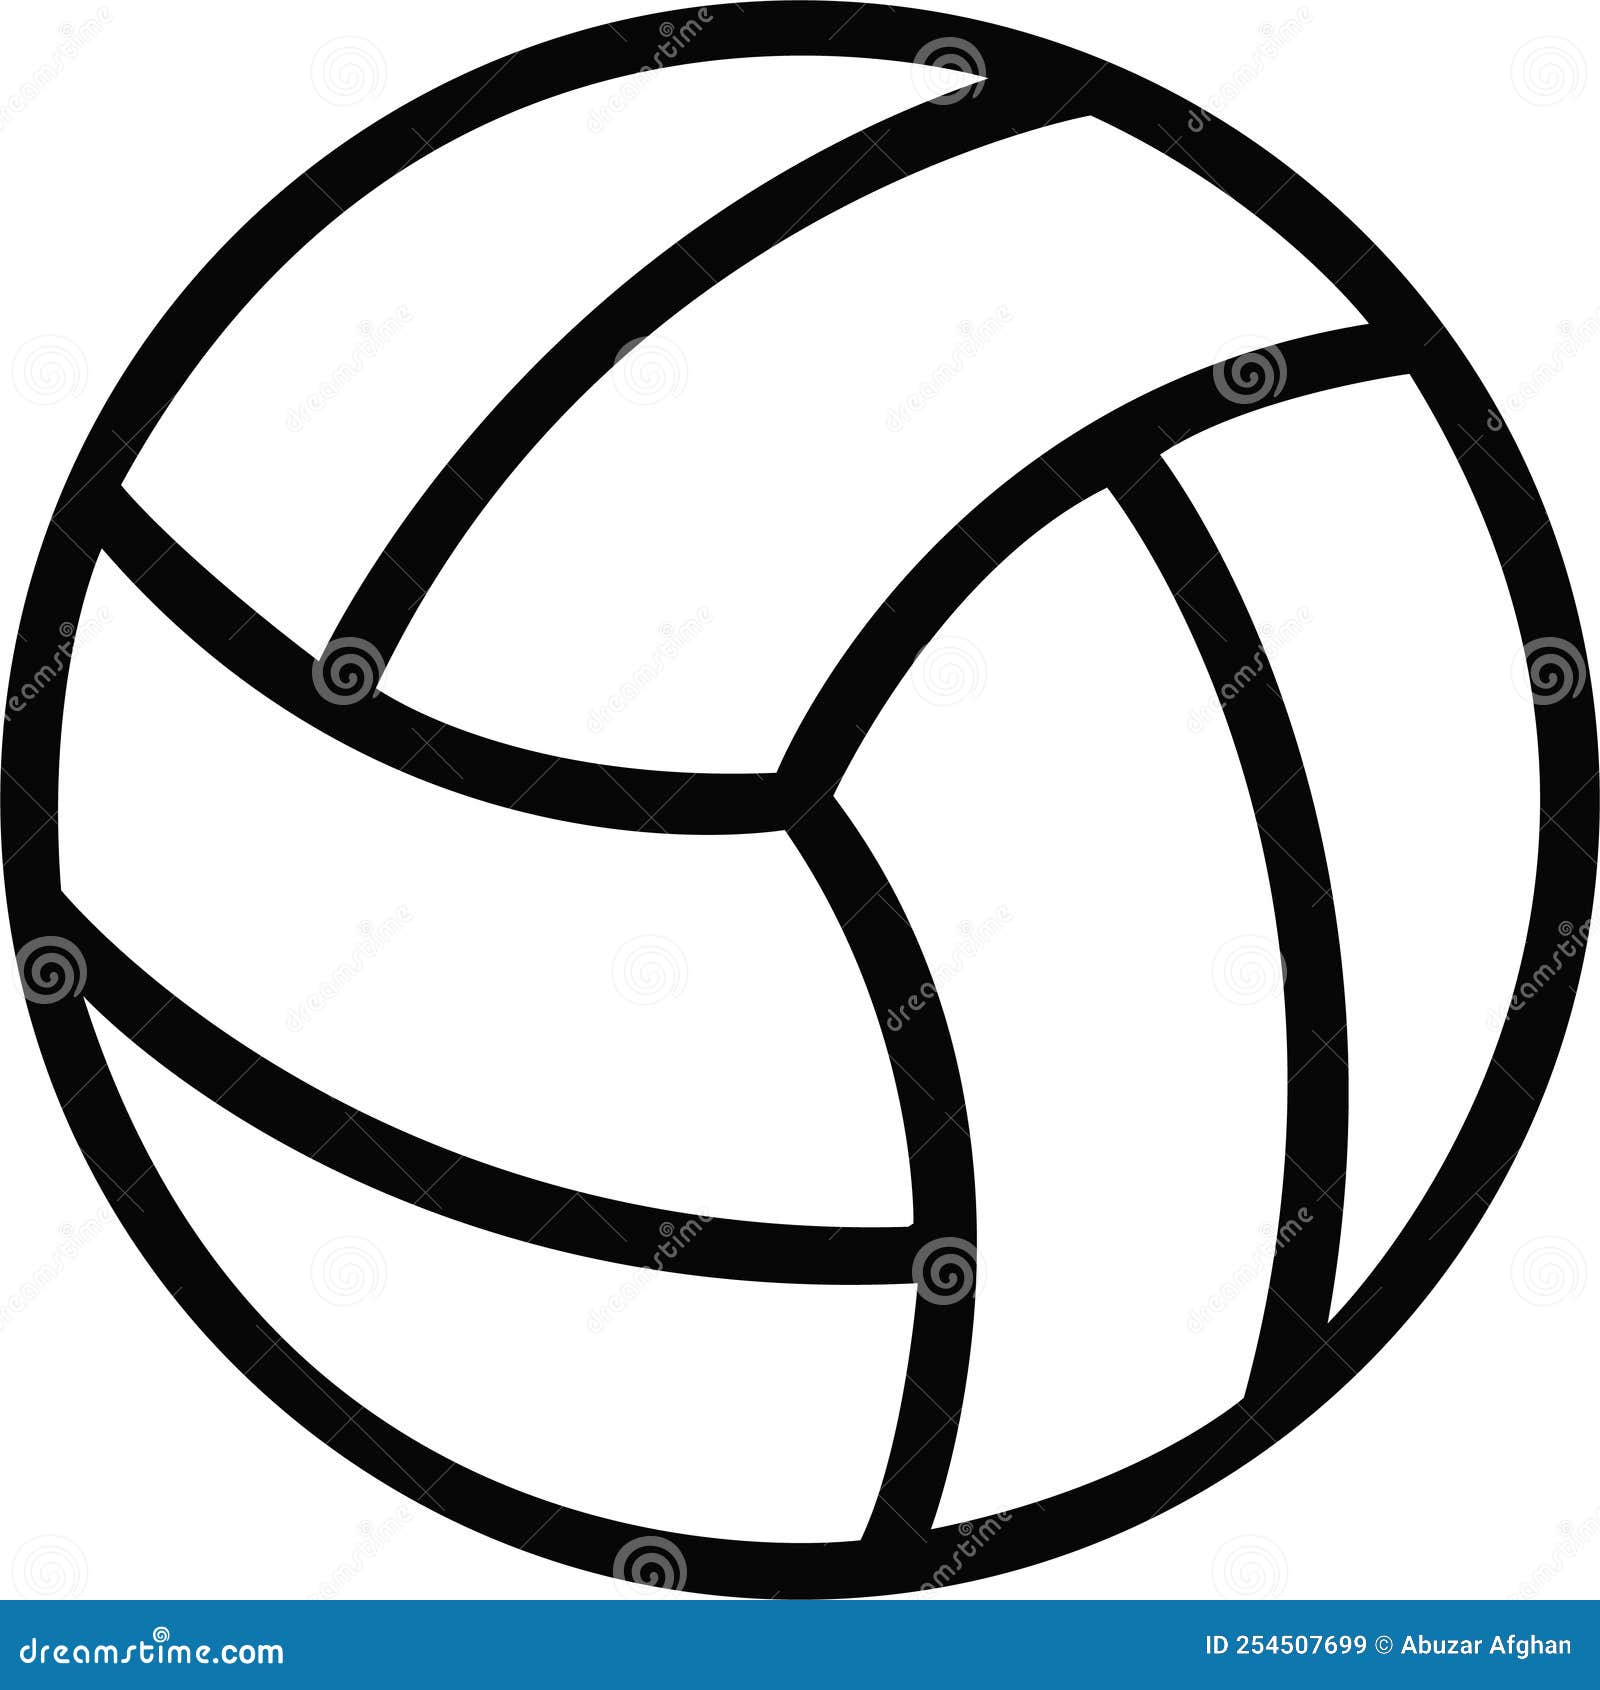 Volleyball Jpg Image with Svg Vector Cut File for Cricut and Silhouette ...